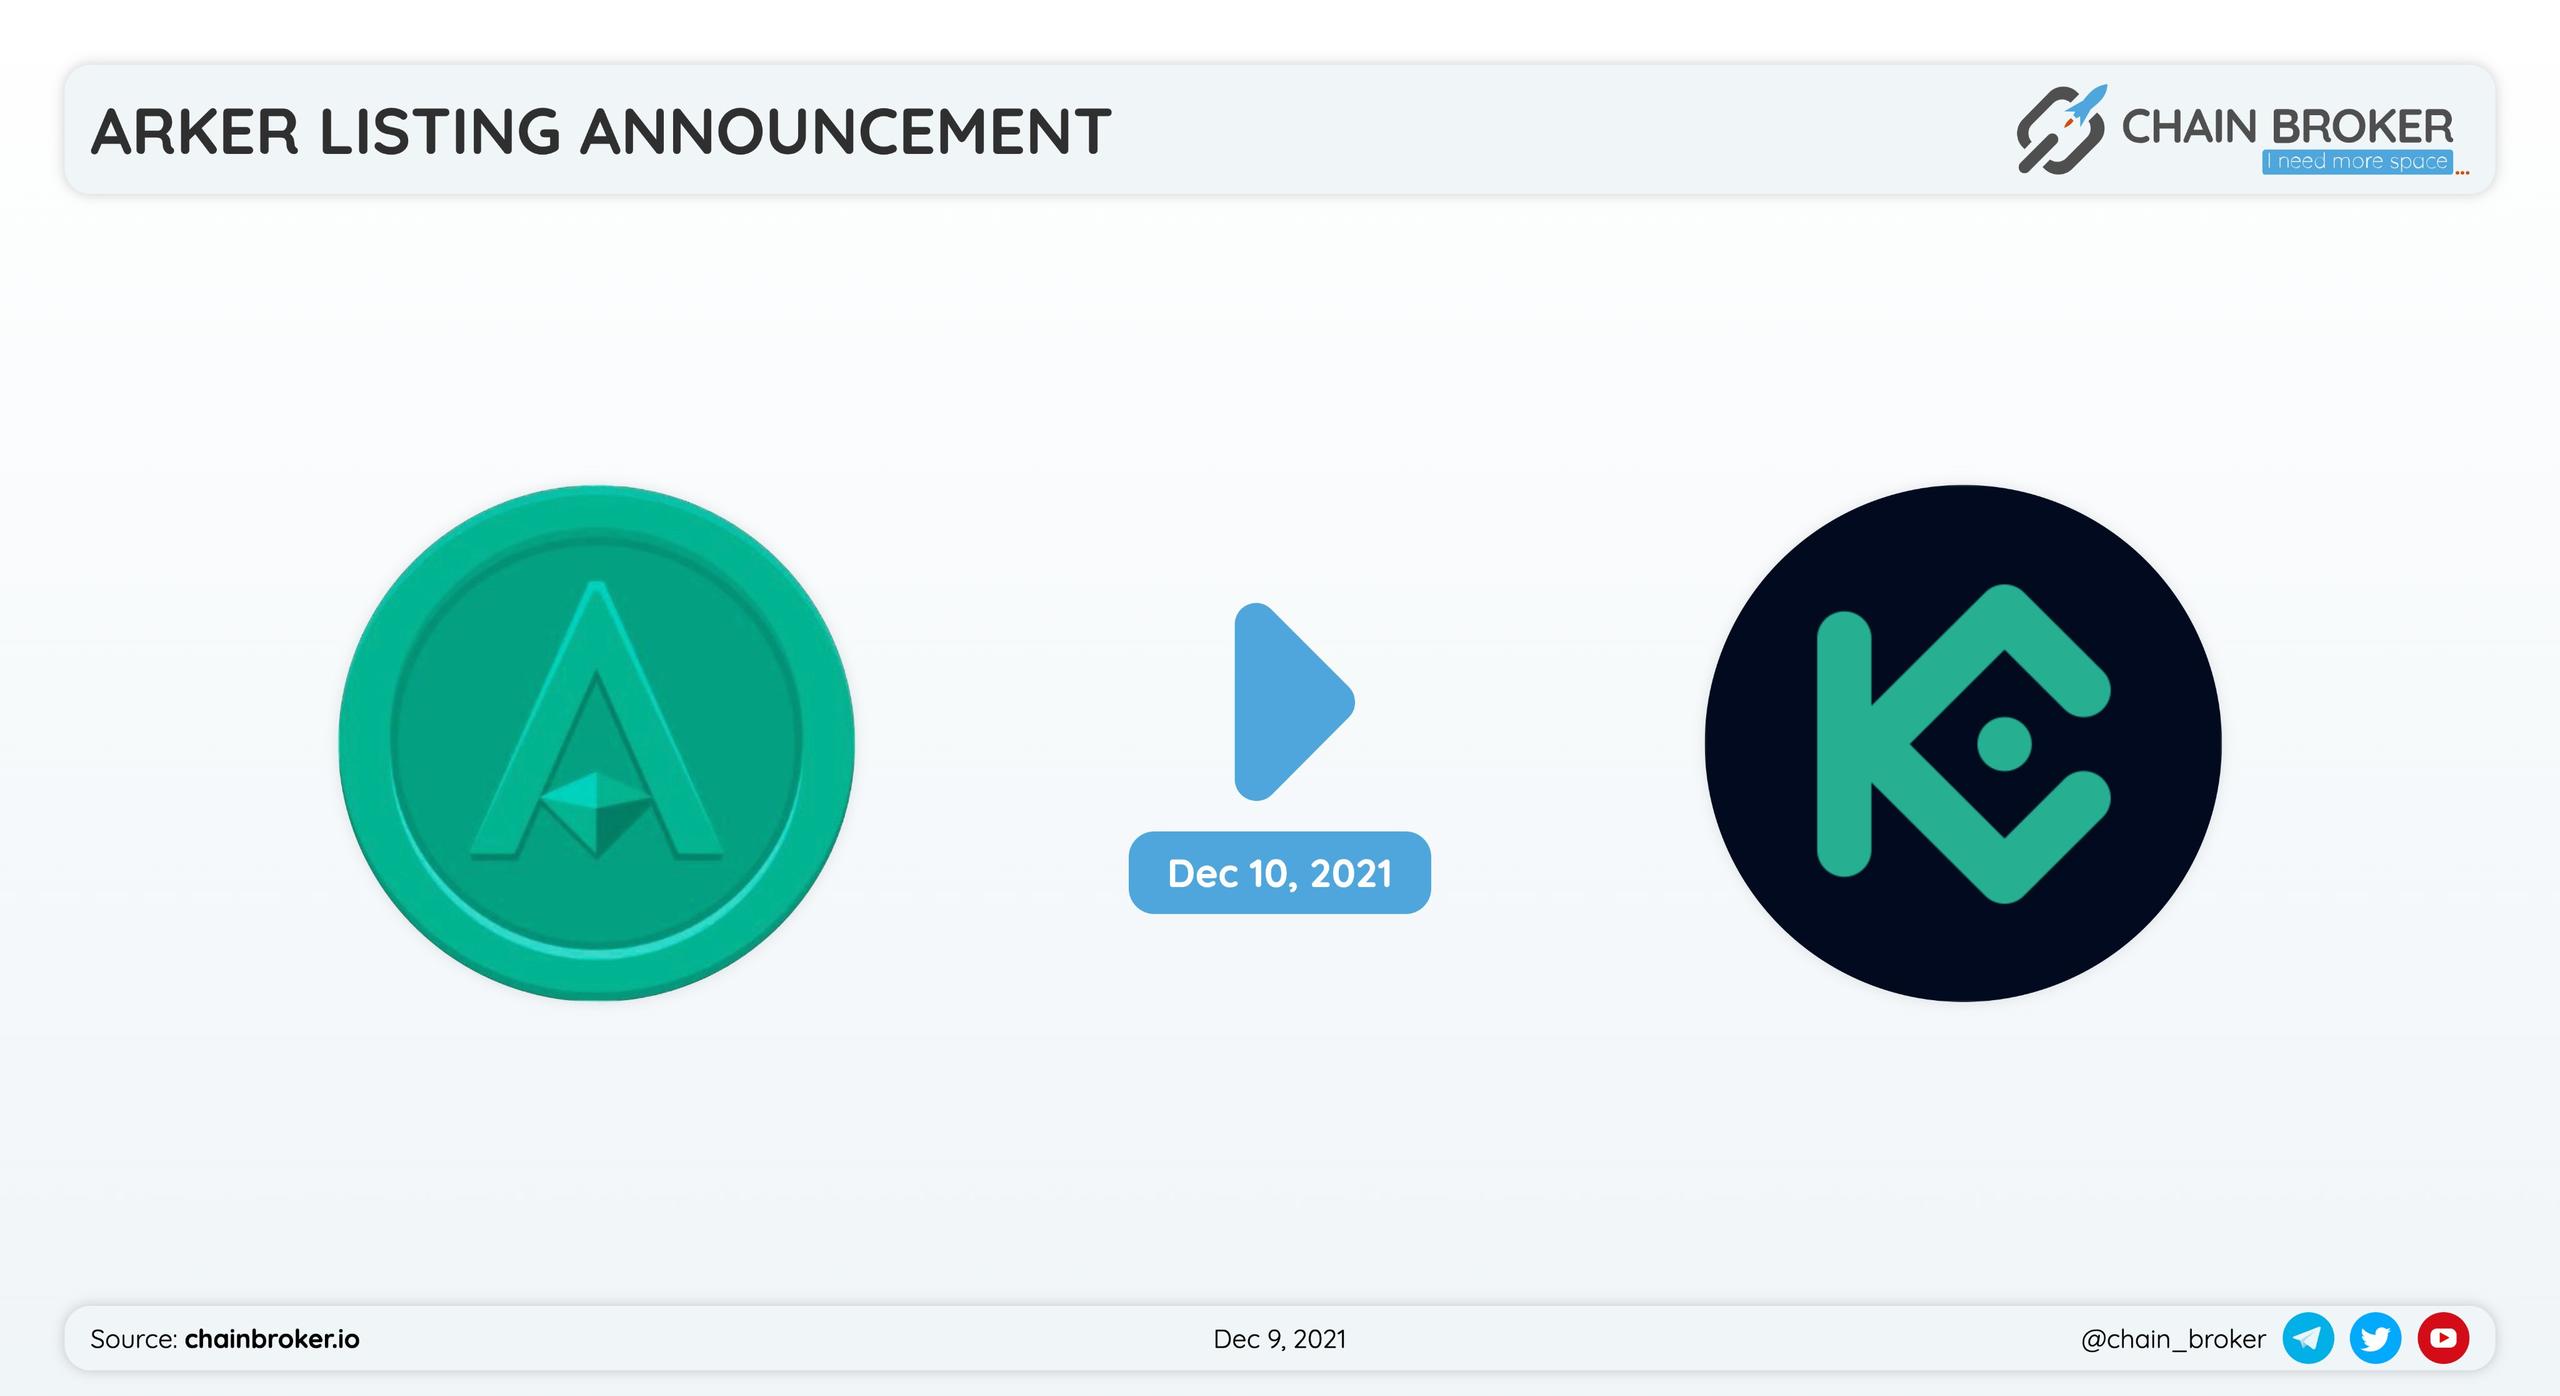 Arker will be trading on Kucoin